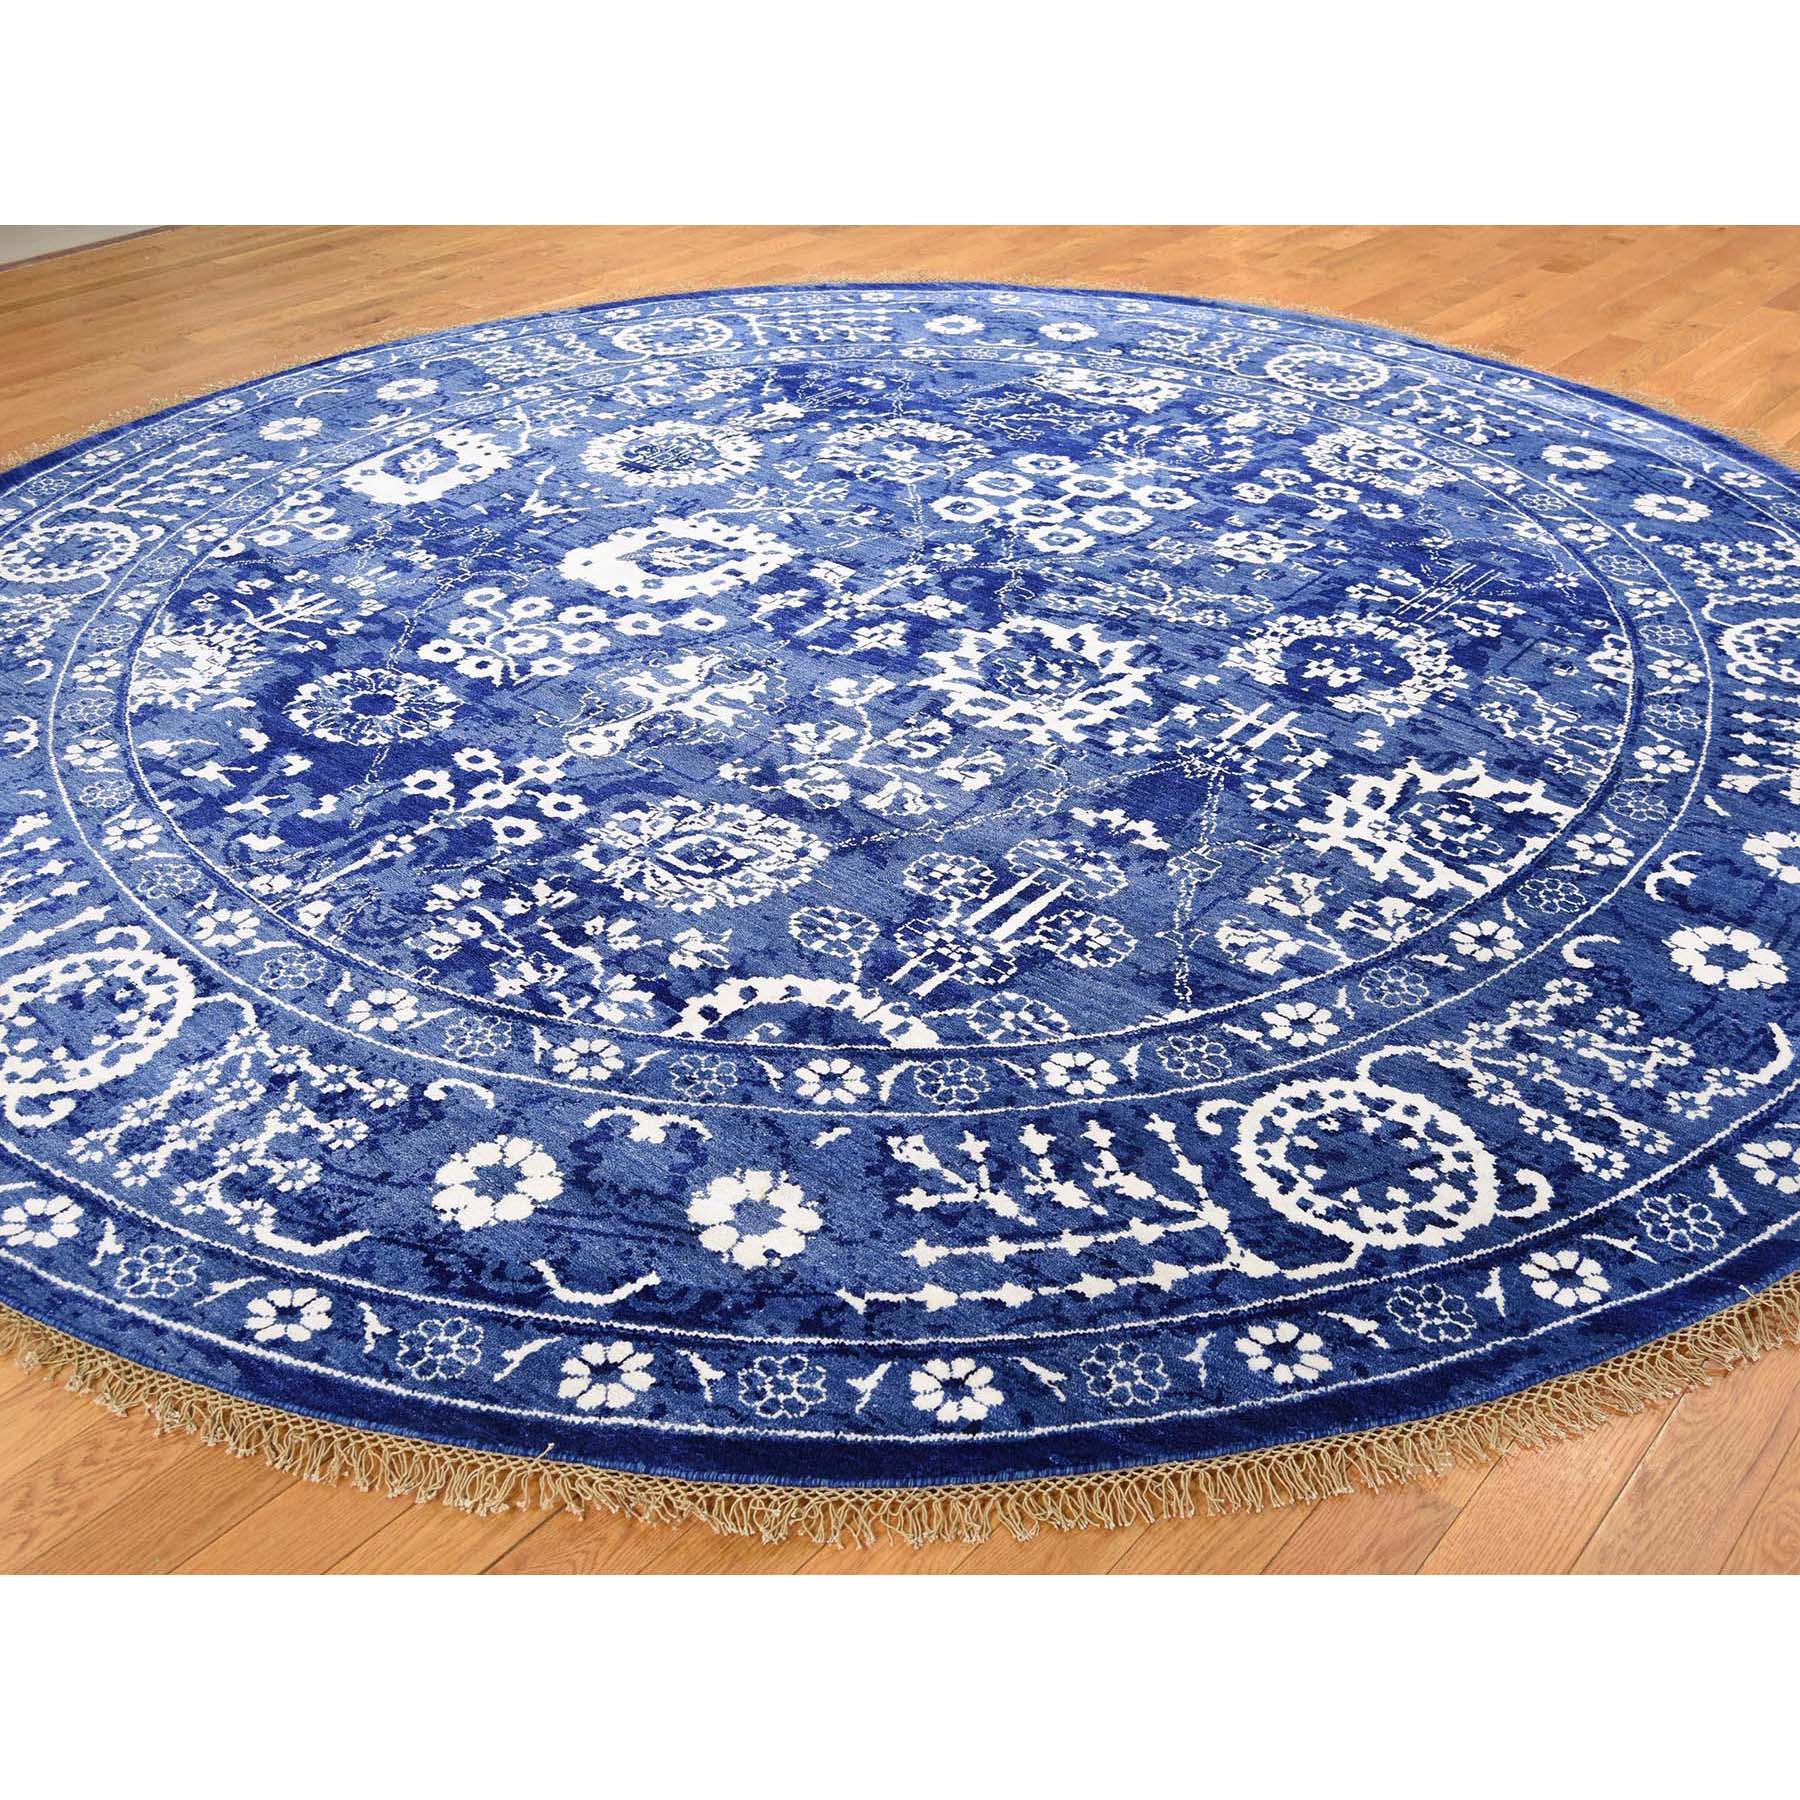 7-1 x7-1  Hand-Knotted Wool And Silk Round Tone on Tone Tabriz Oriental Rug 